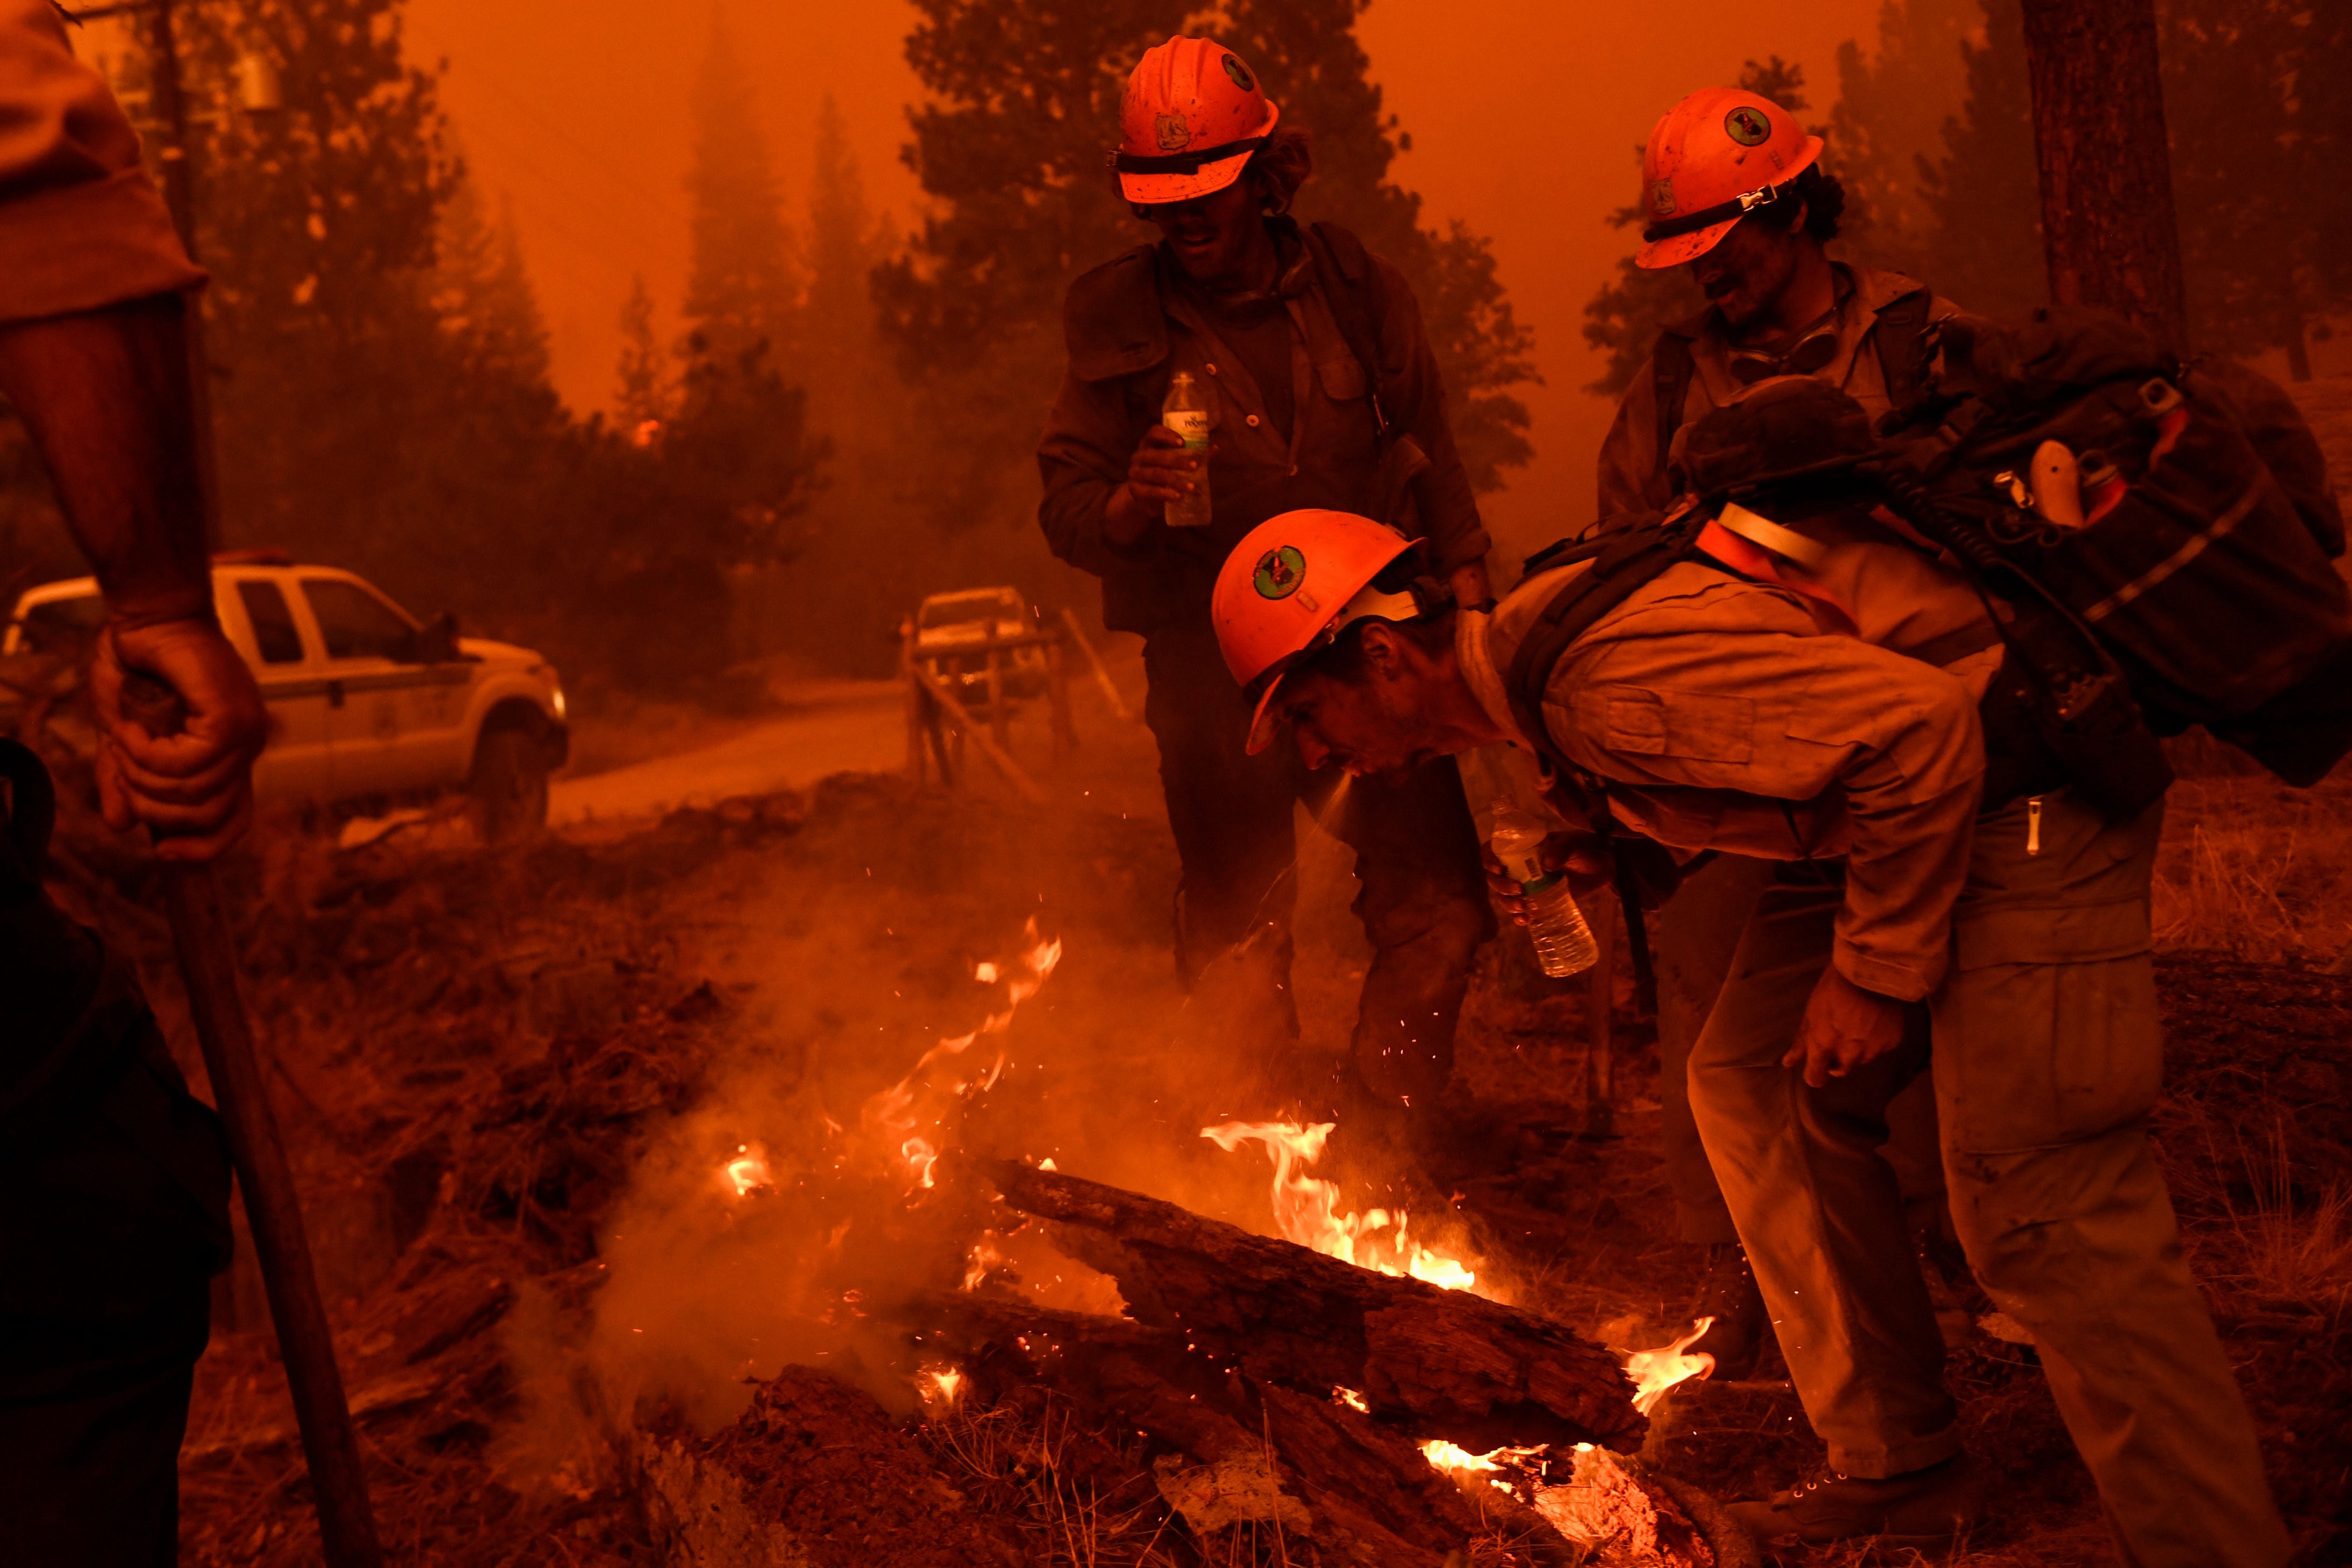 Firefighters improvise and spray water from their mouths to control a small spot fire while waiting for a hose line during the Windy Fire in the Sequoia National Forest near Johnsondale, California on September 22, 2021